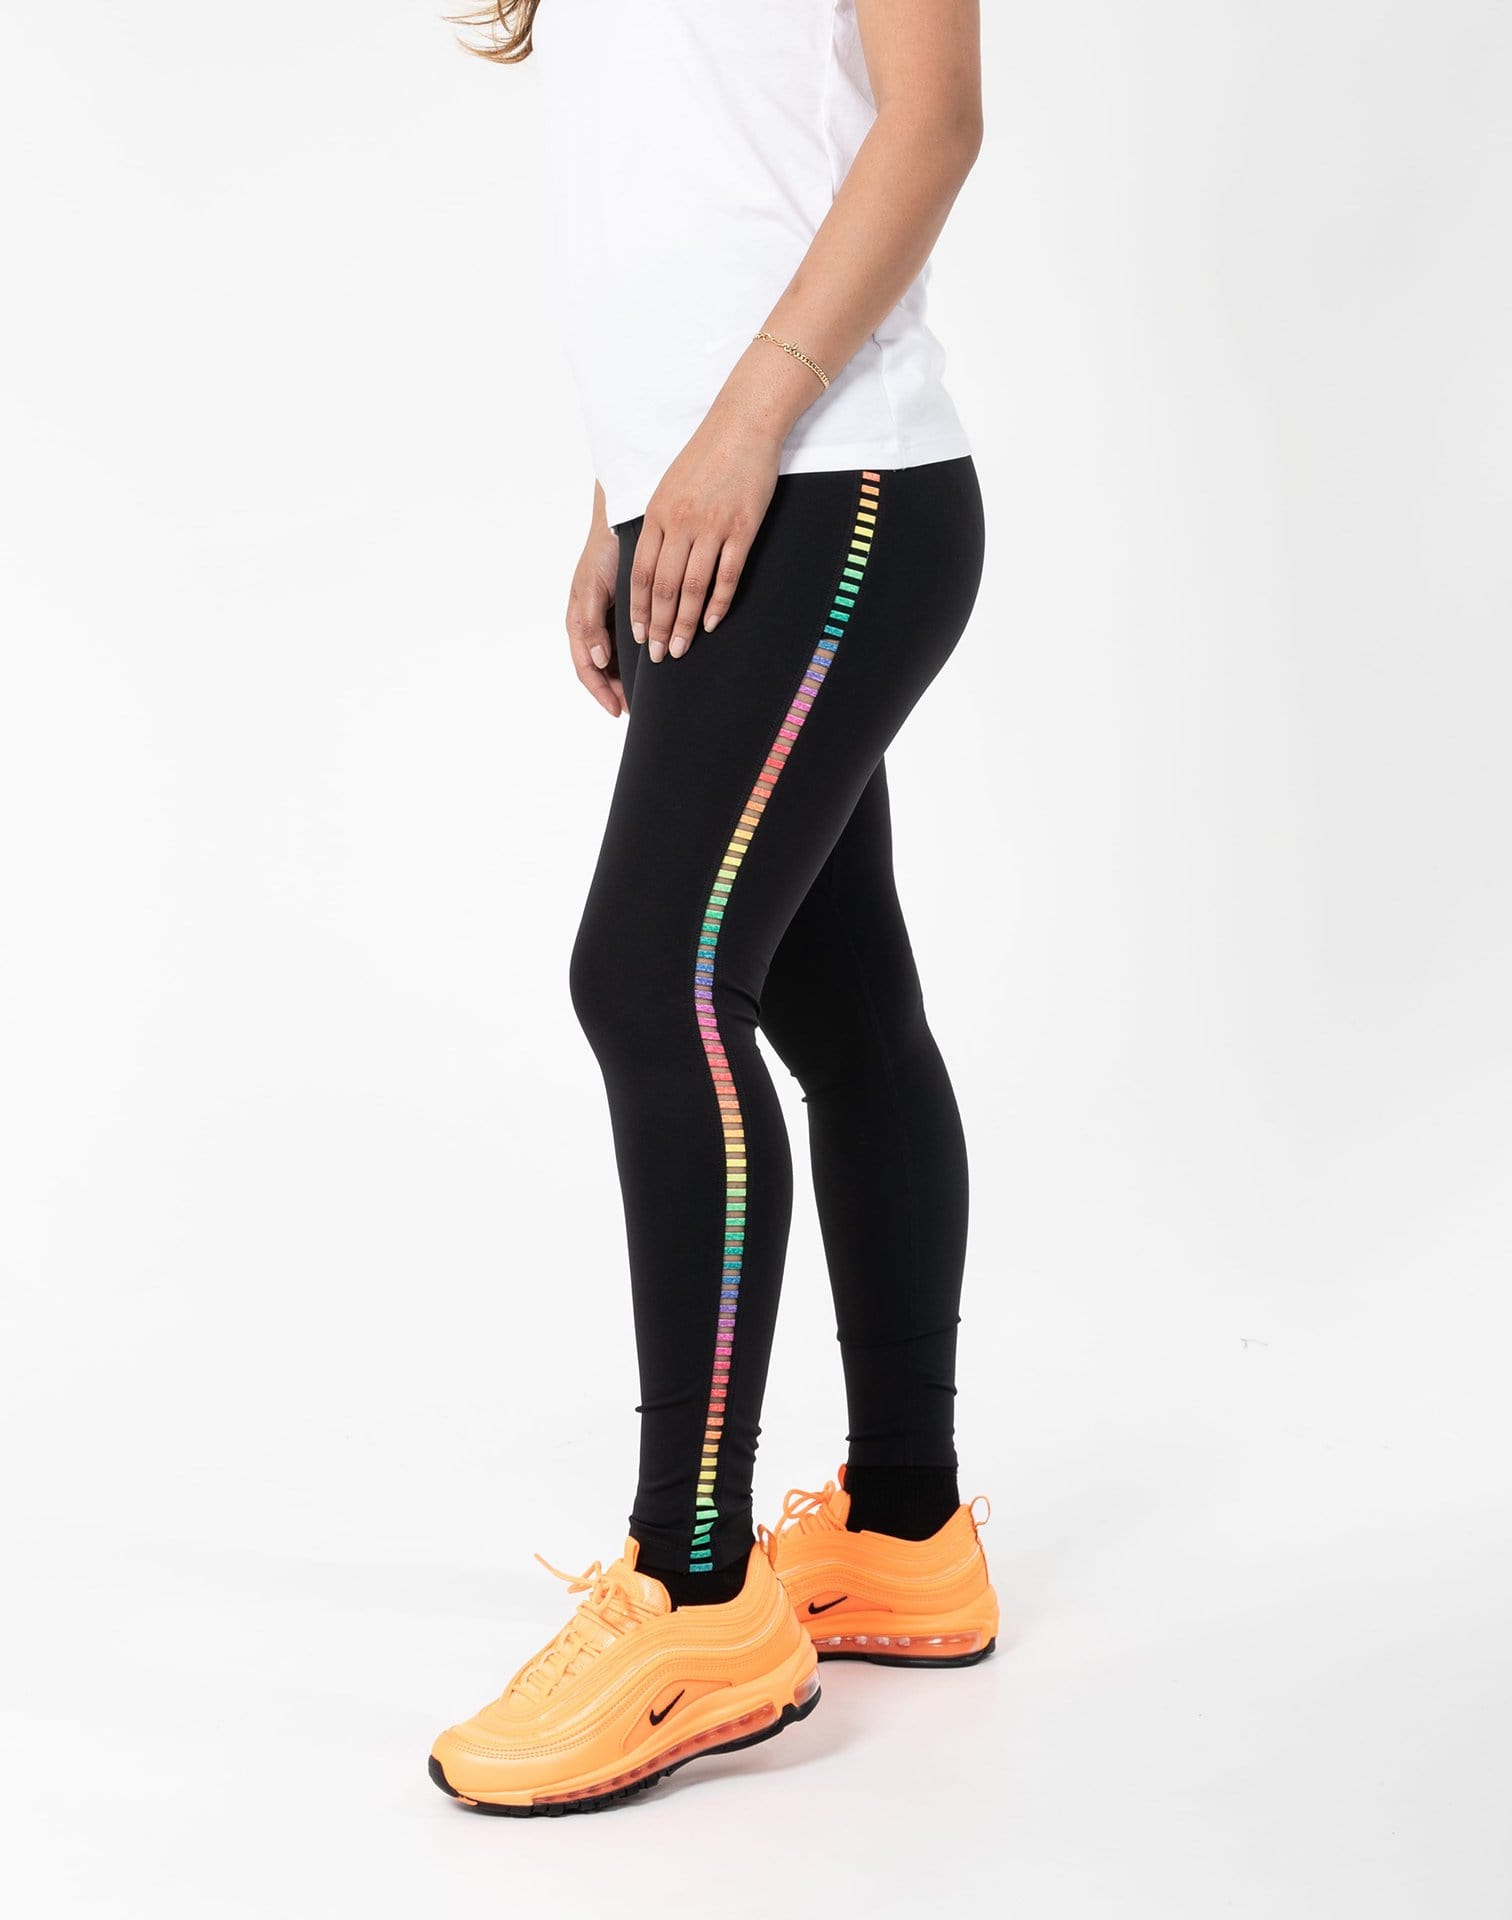 Nike One Rainbow Ladder 7/8 Leggings Size XS - $42 New With